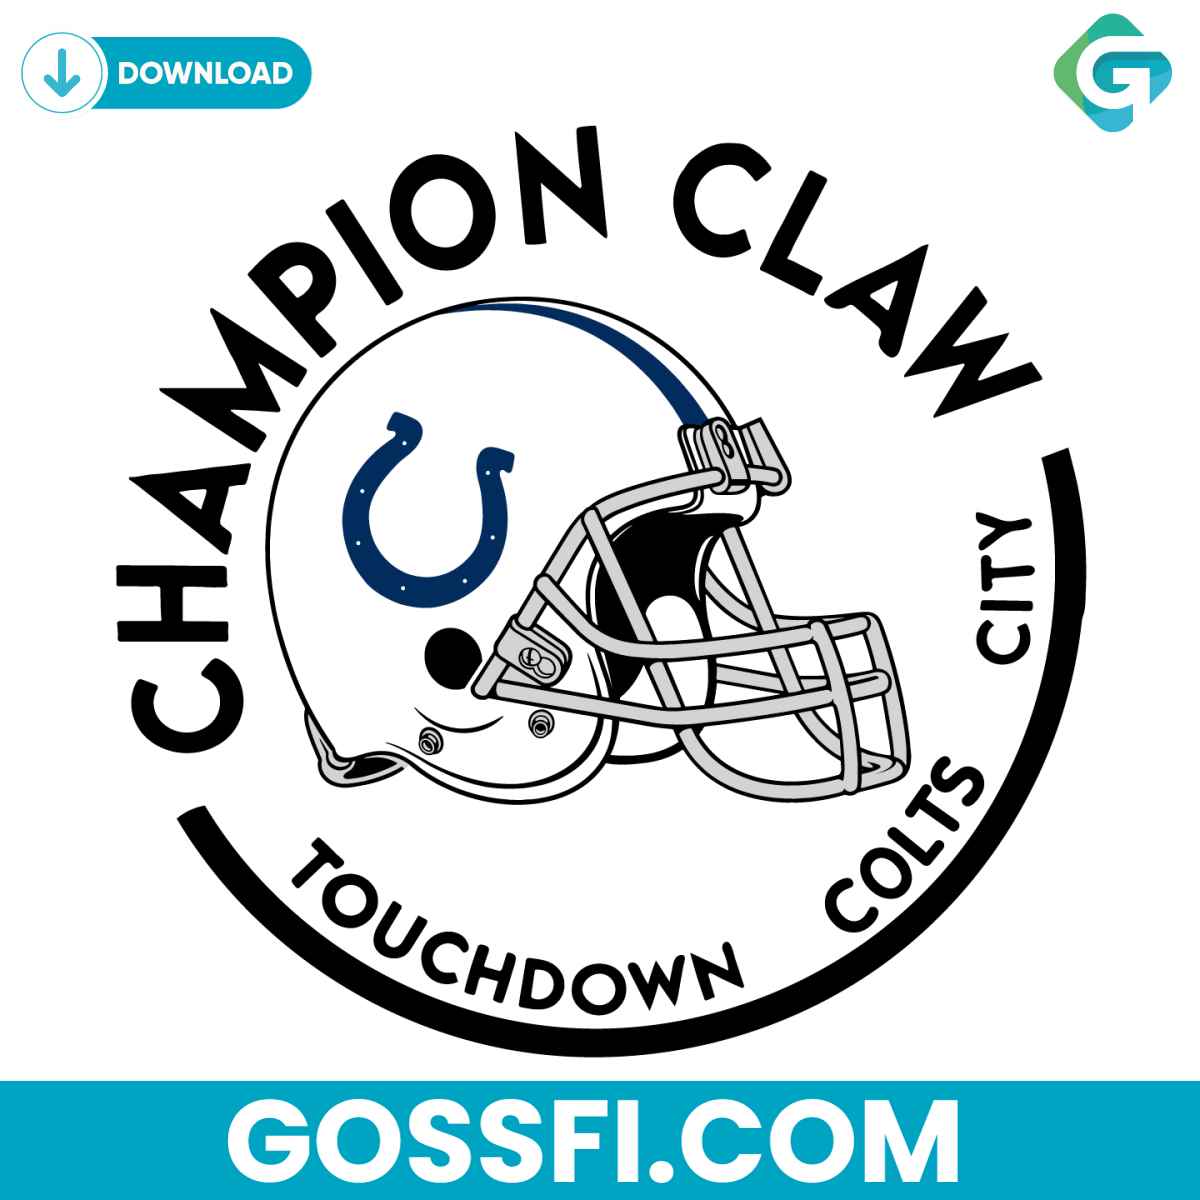 champion-claw-touchdown-colts-city-svg